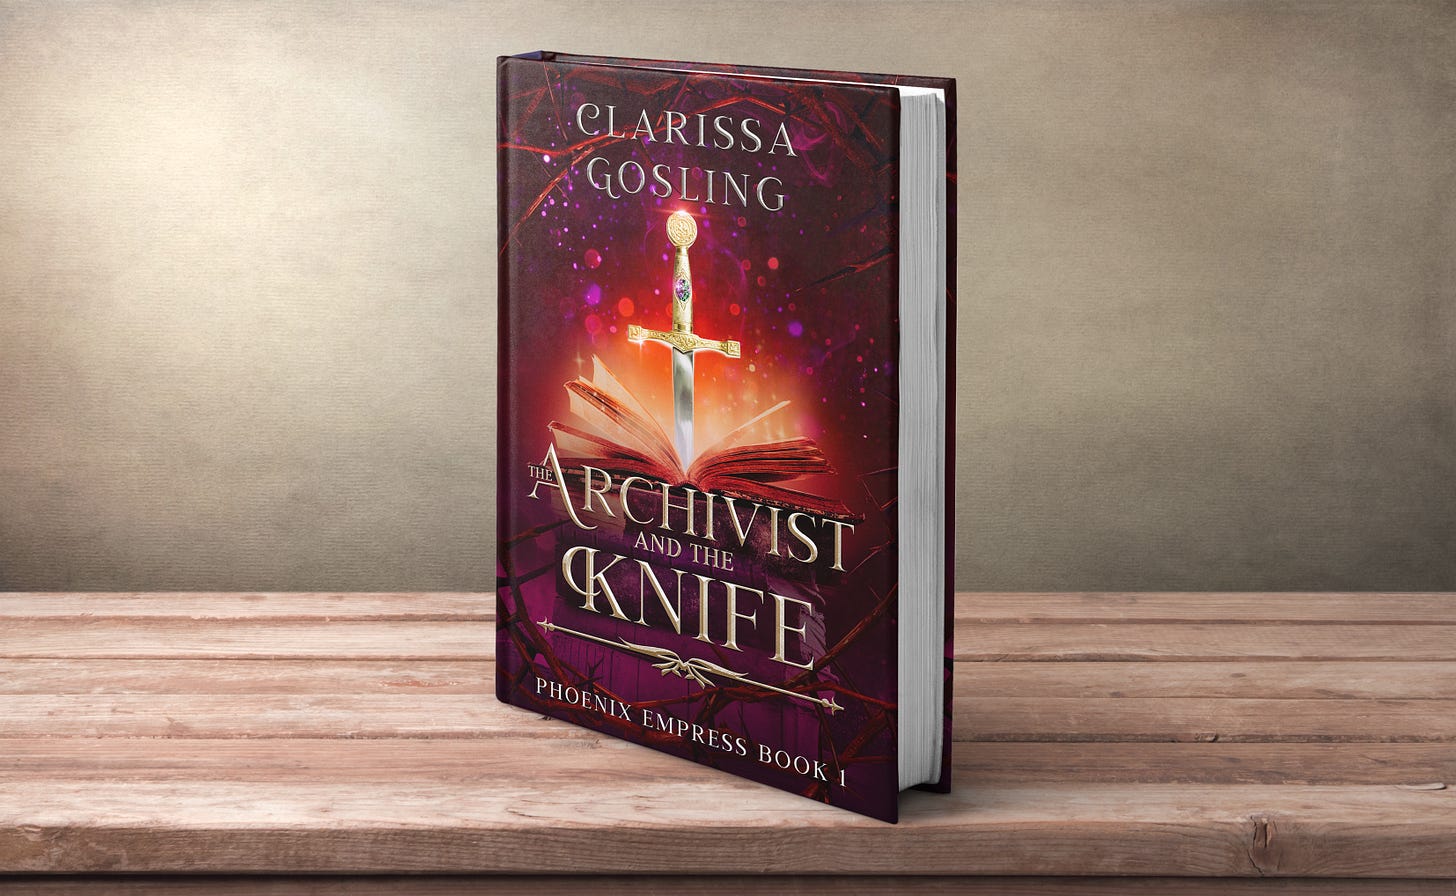 Book mockup of The Archivist and the Knife by Clarissa Gosling